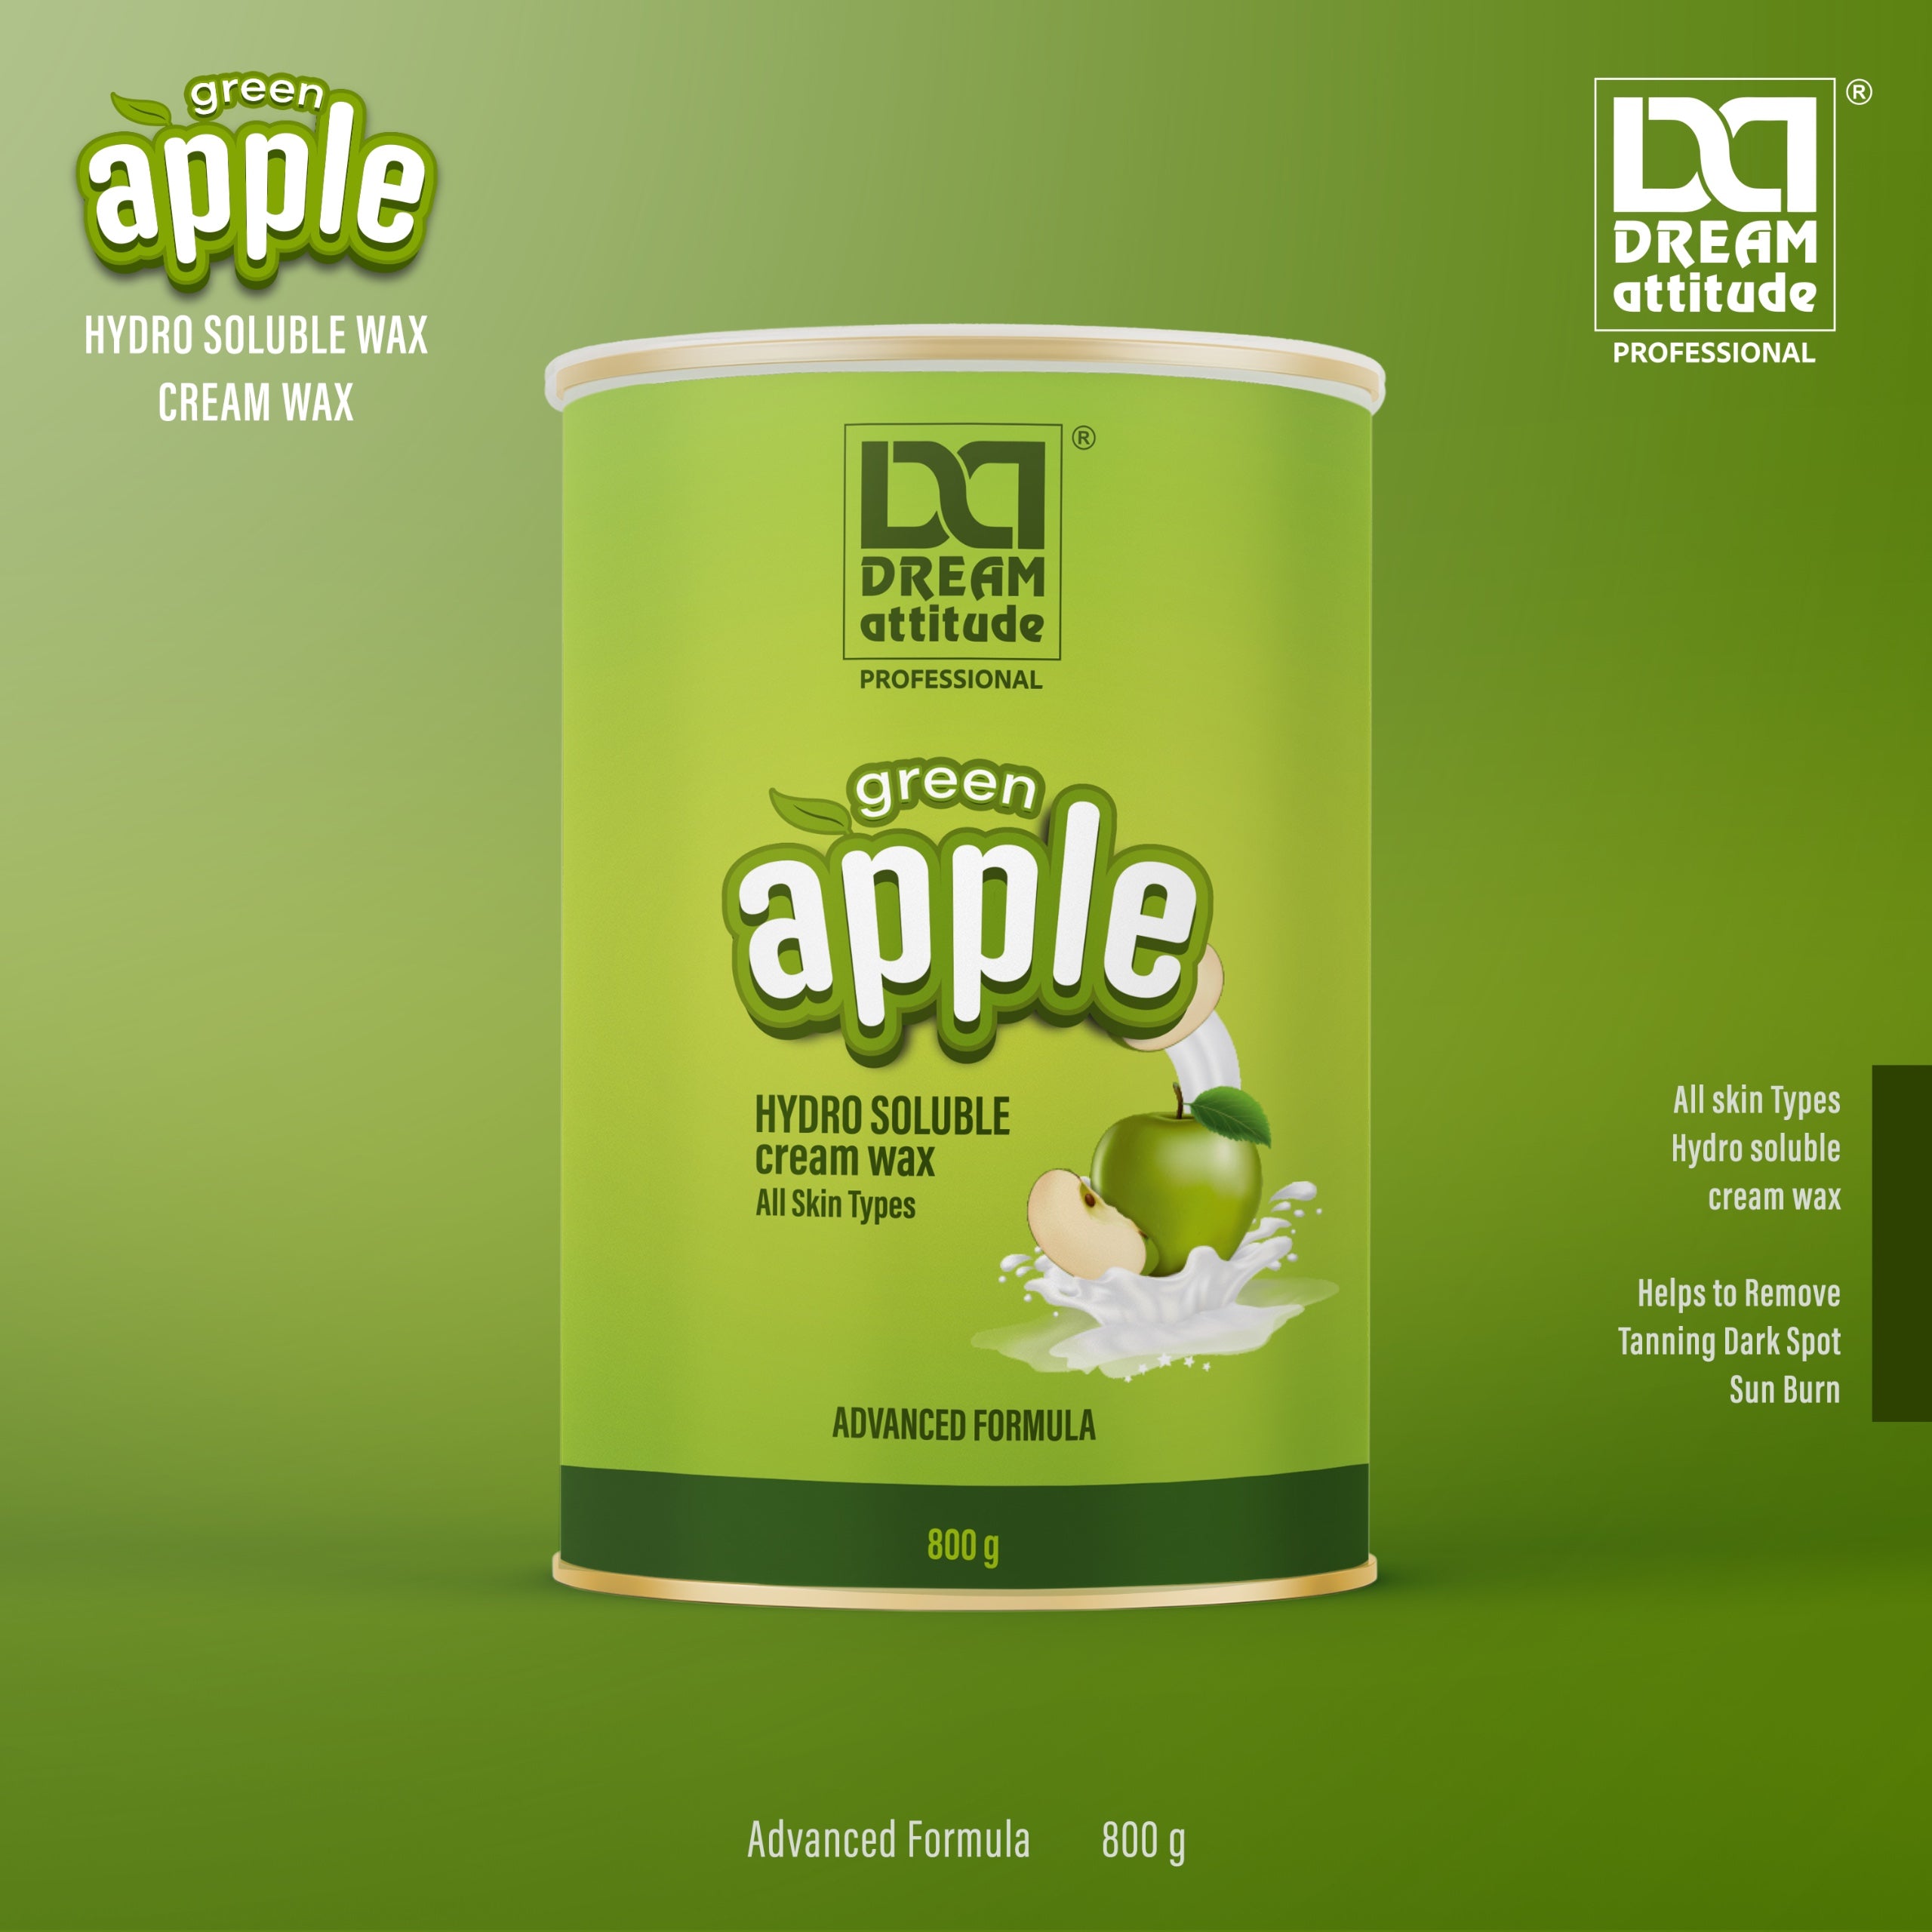 Introducing our latest creation, DREAM Attitude Green Apple Hydro Soluble Cream Wax